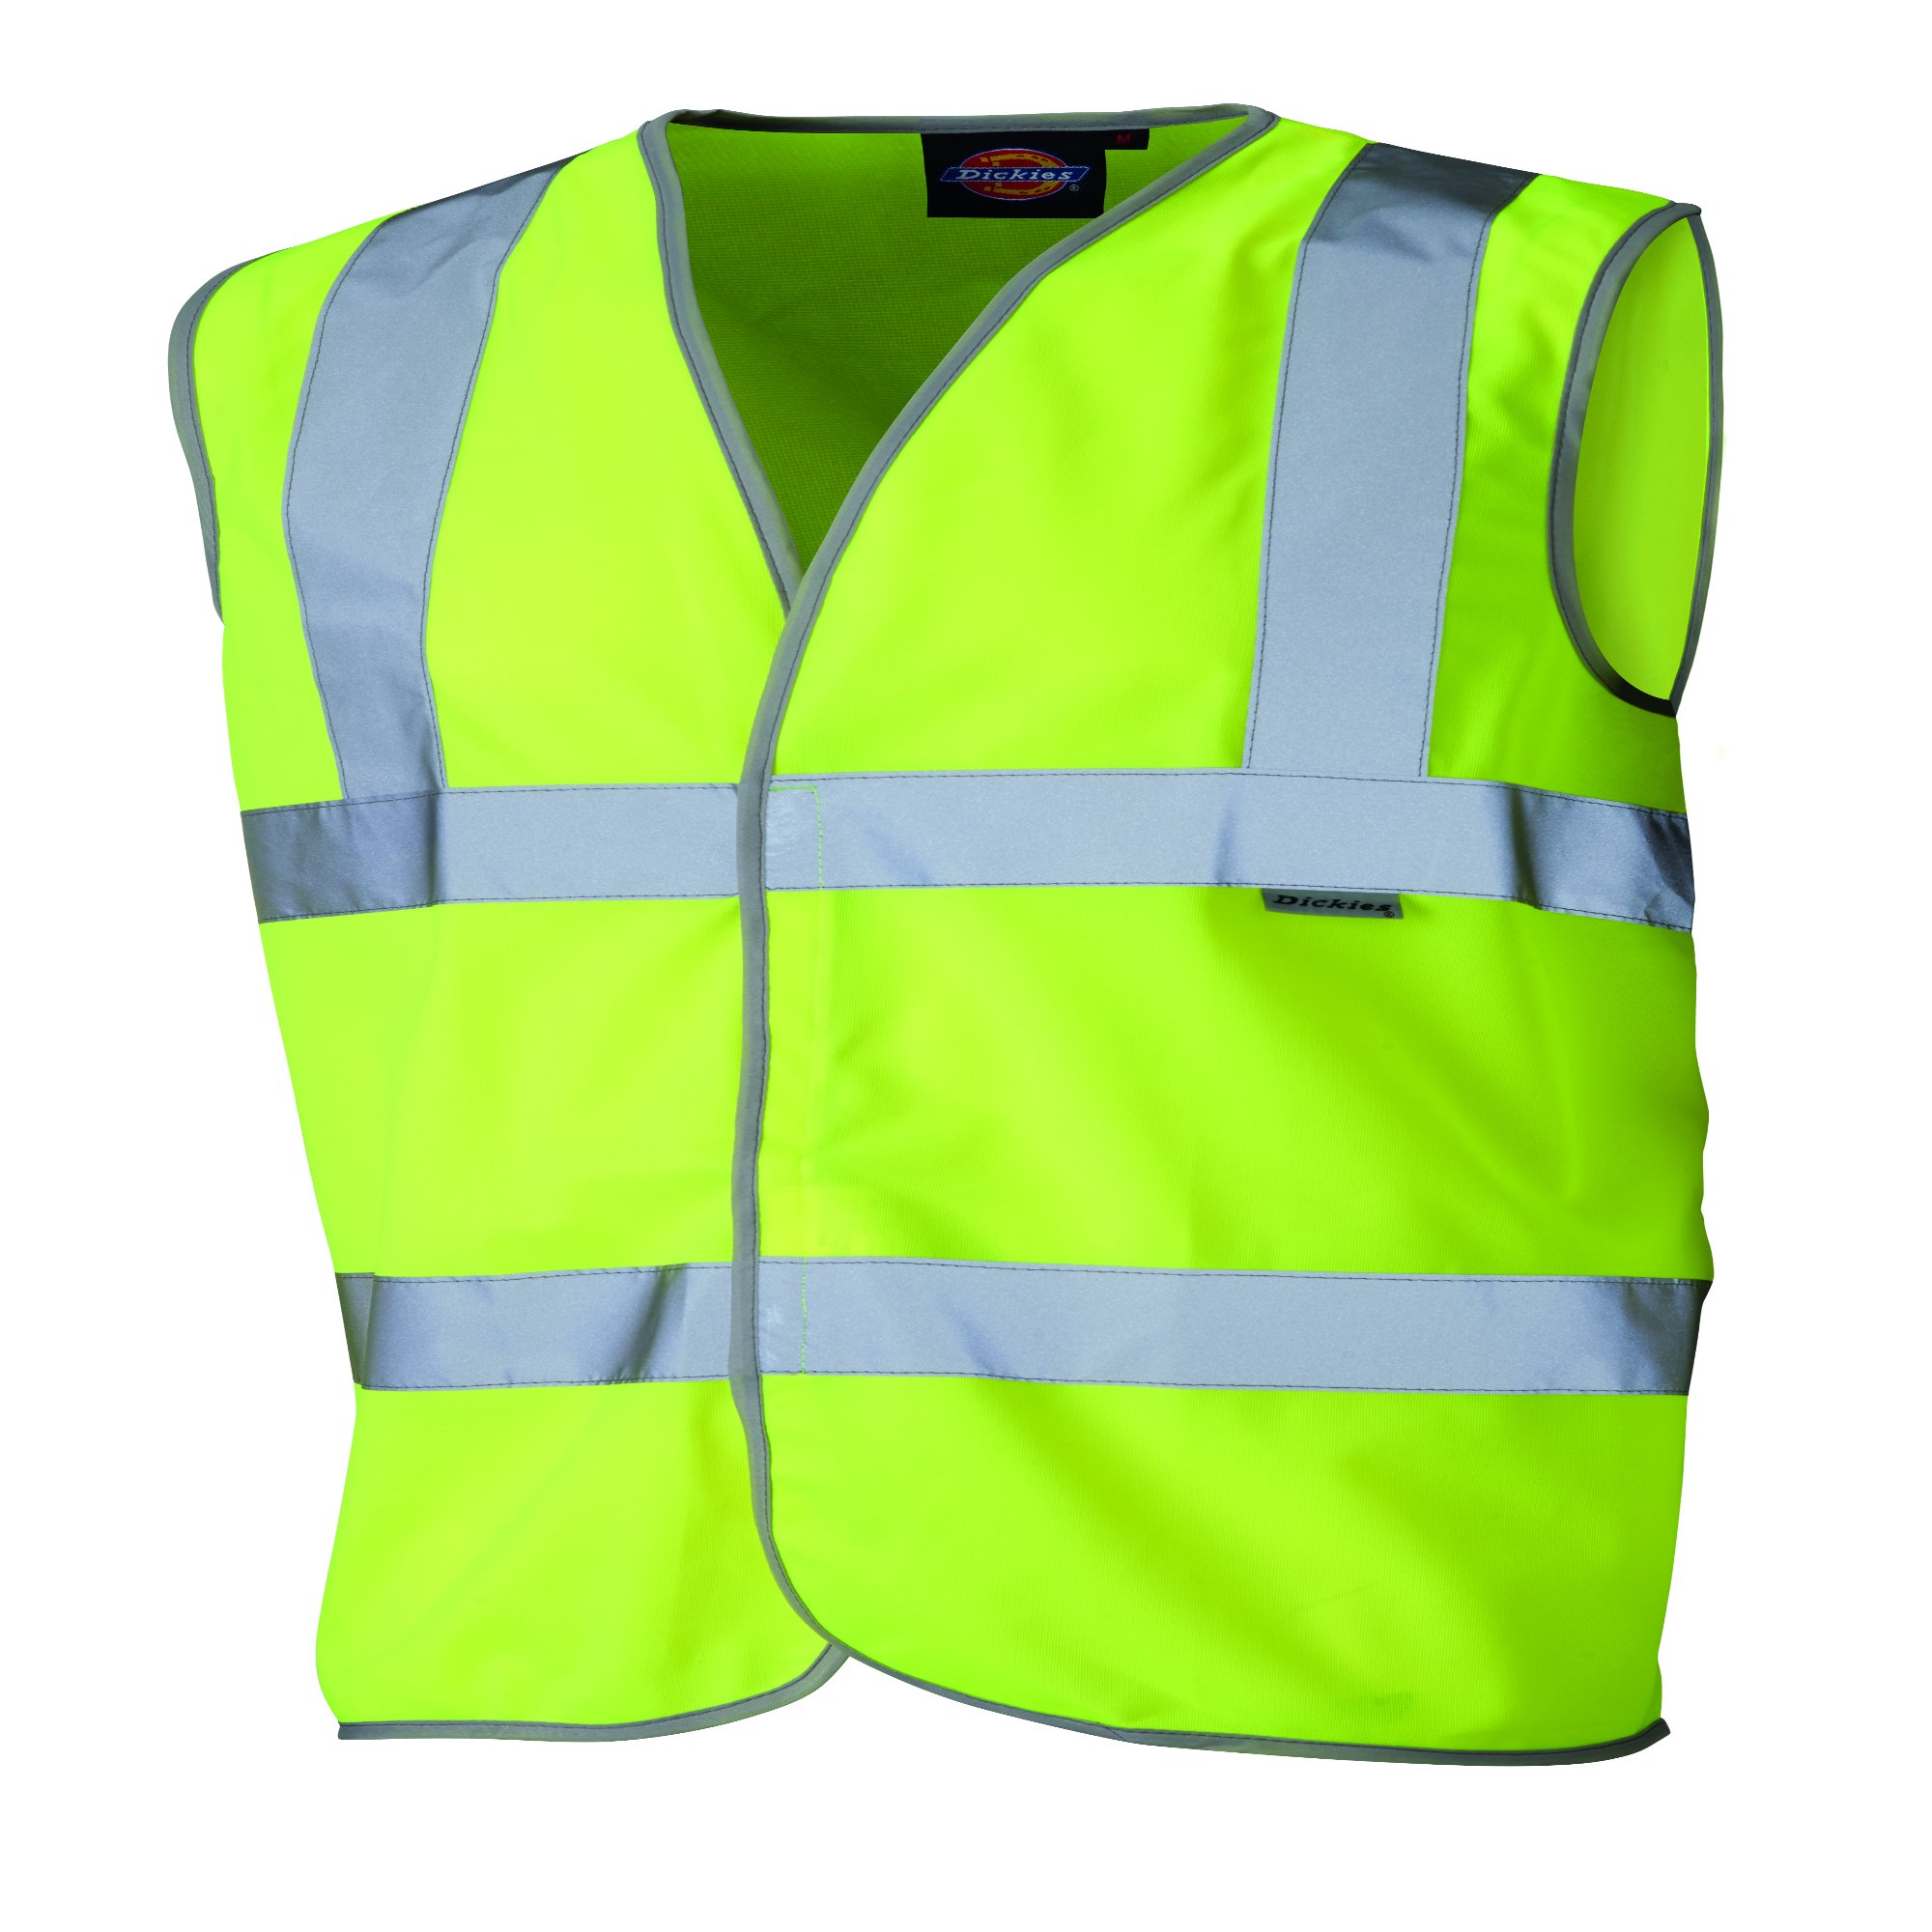 Dickies Hi-Vis Highway Safety Waistcoat - Safety Wear & PPE | Green-tech